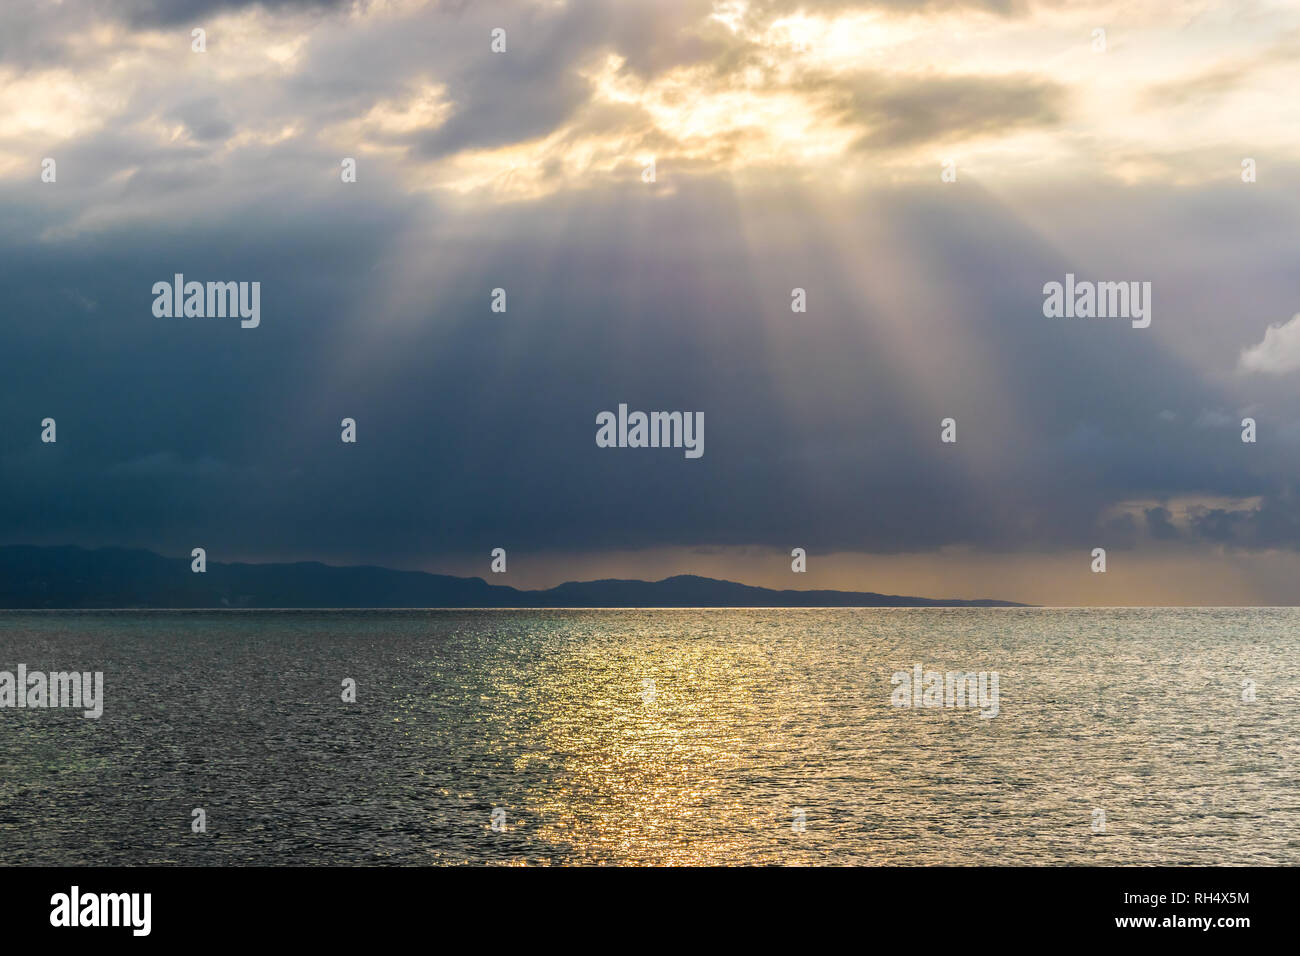 Scenic landscape ocean mountain silhouette view of sun rays bursting through clouds. Concept of breakthrough, hope, signs. Stock Photo